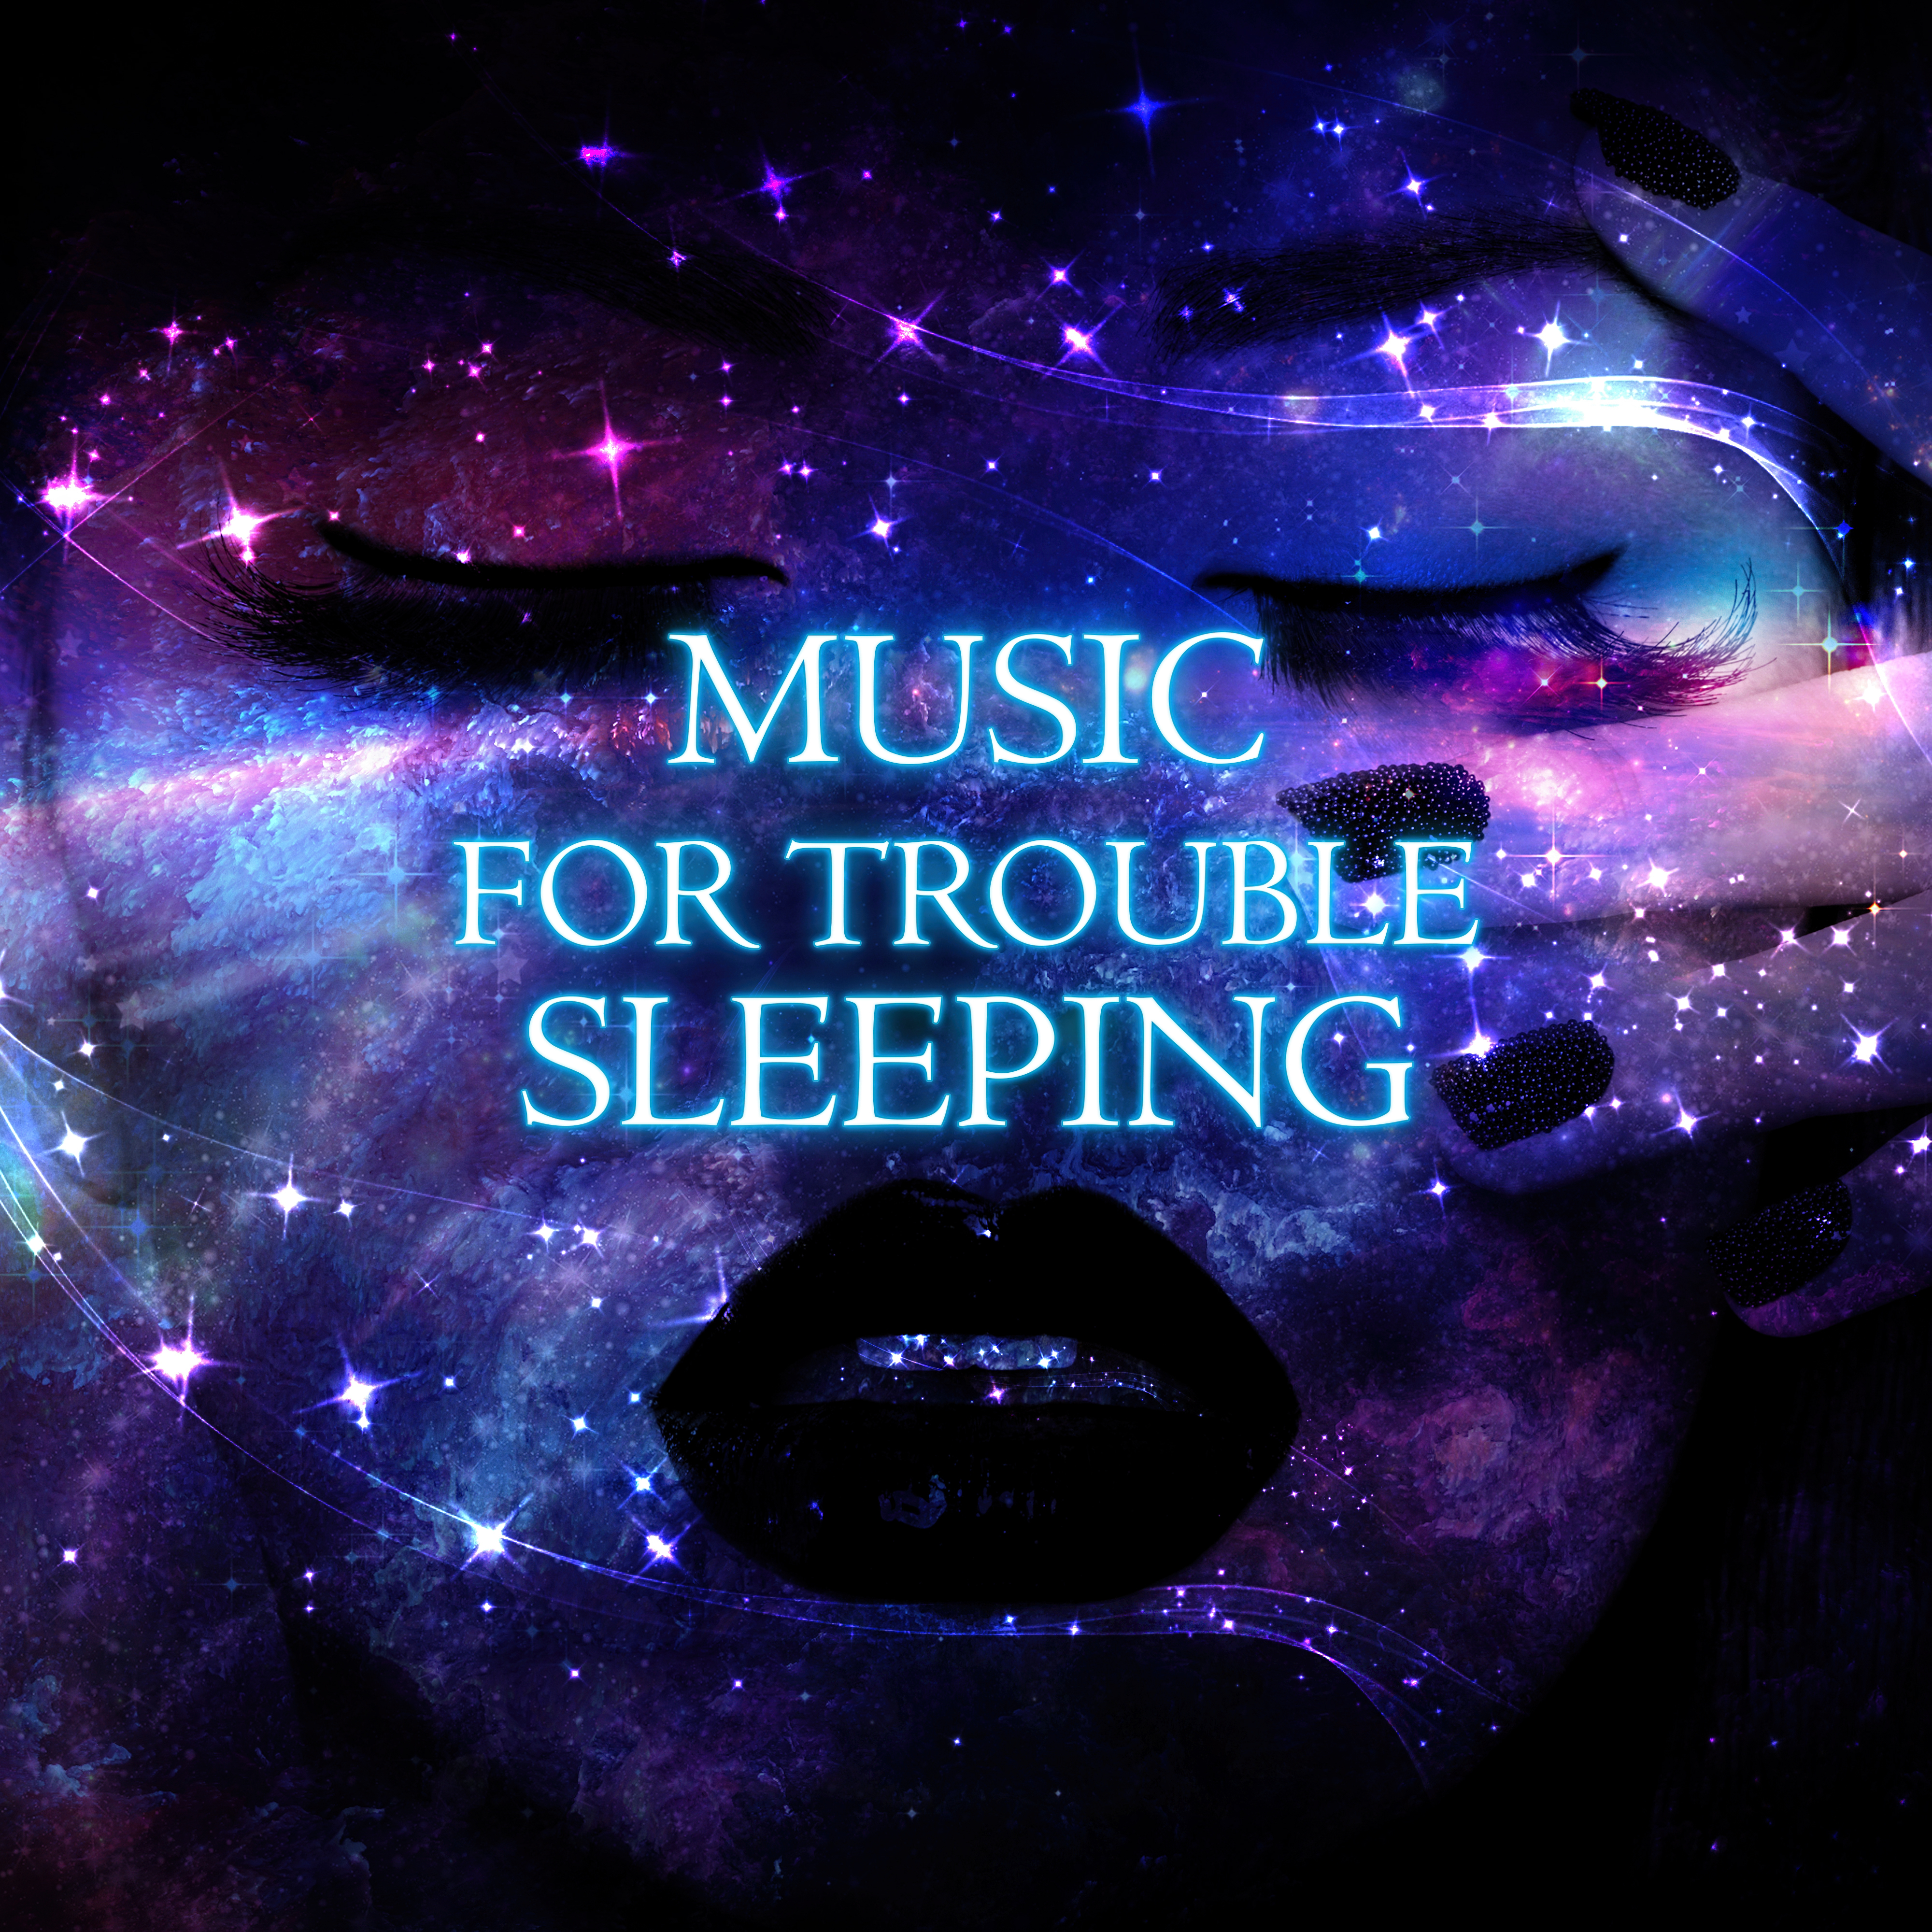 Music for Trouble Sleeping - Instrumental Music with Nature Sounds for Insomnia Therapy,  Mindfulness Meditation Spiritual Healing, Sleep Music to Help You Relax all Night